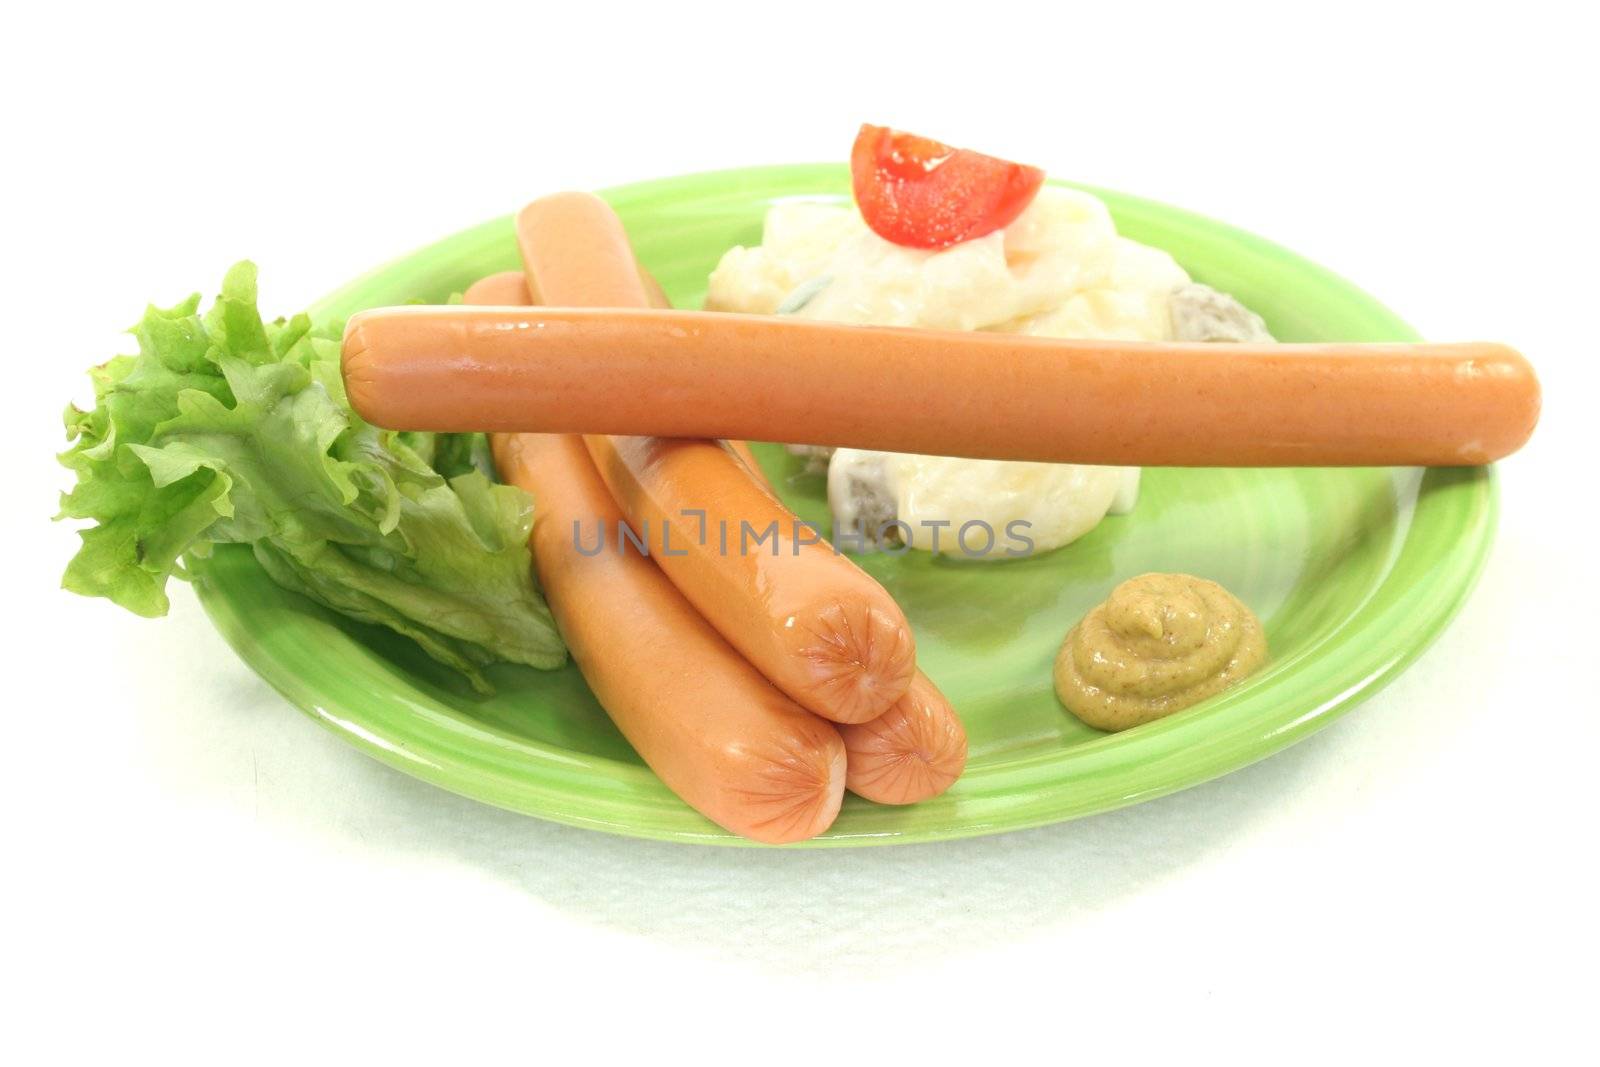 Wiener Sausage with potato salad and lettuce on a white background